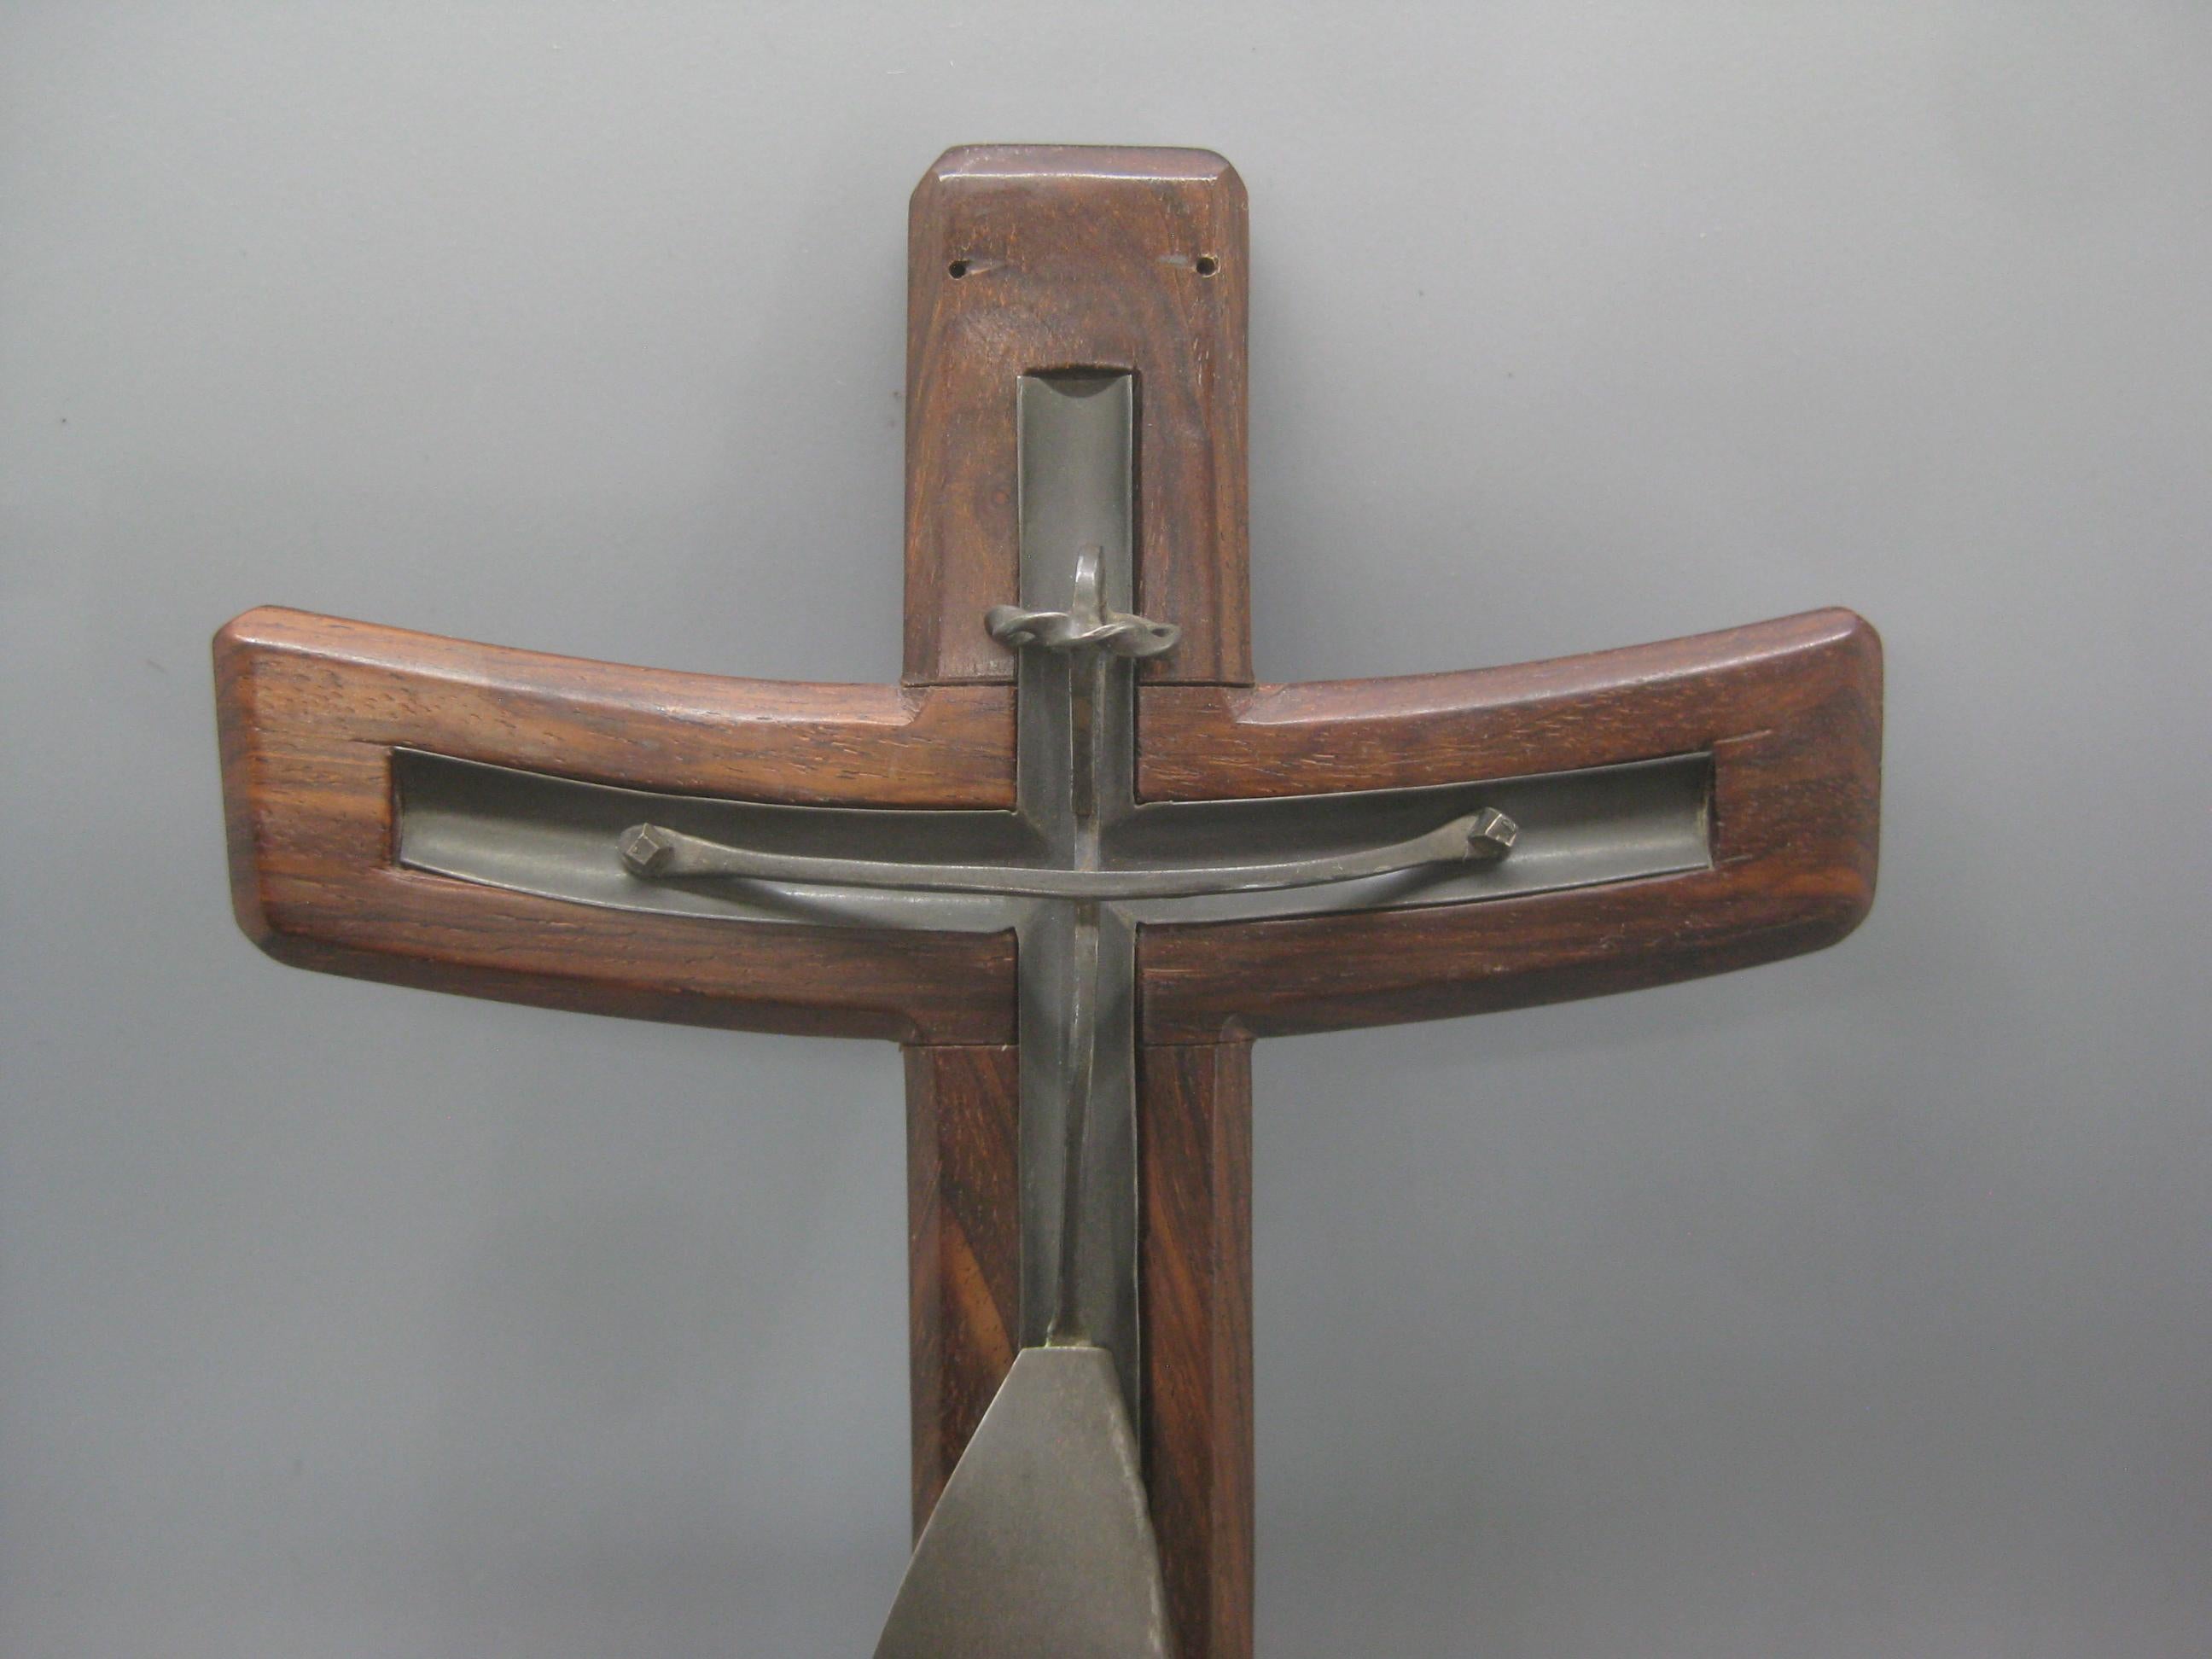 Hand crafted Modernist sterling silver on rosewood wood crucifix cross, circa 1950's. Made in Taxco, Mexico and has the artist initials(MH) on the back tag. Wonderful abstract modernist design and form. Displays well. The sterling piece can be